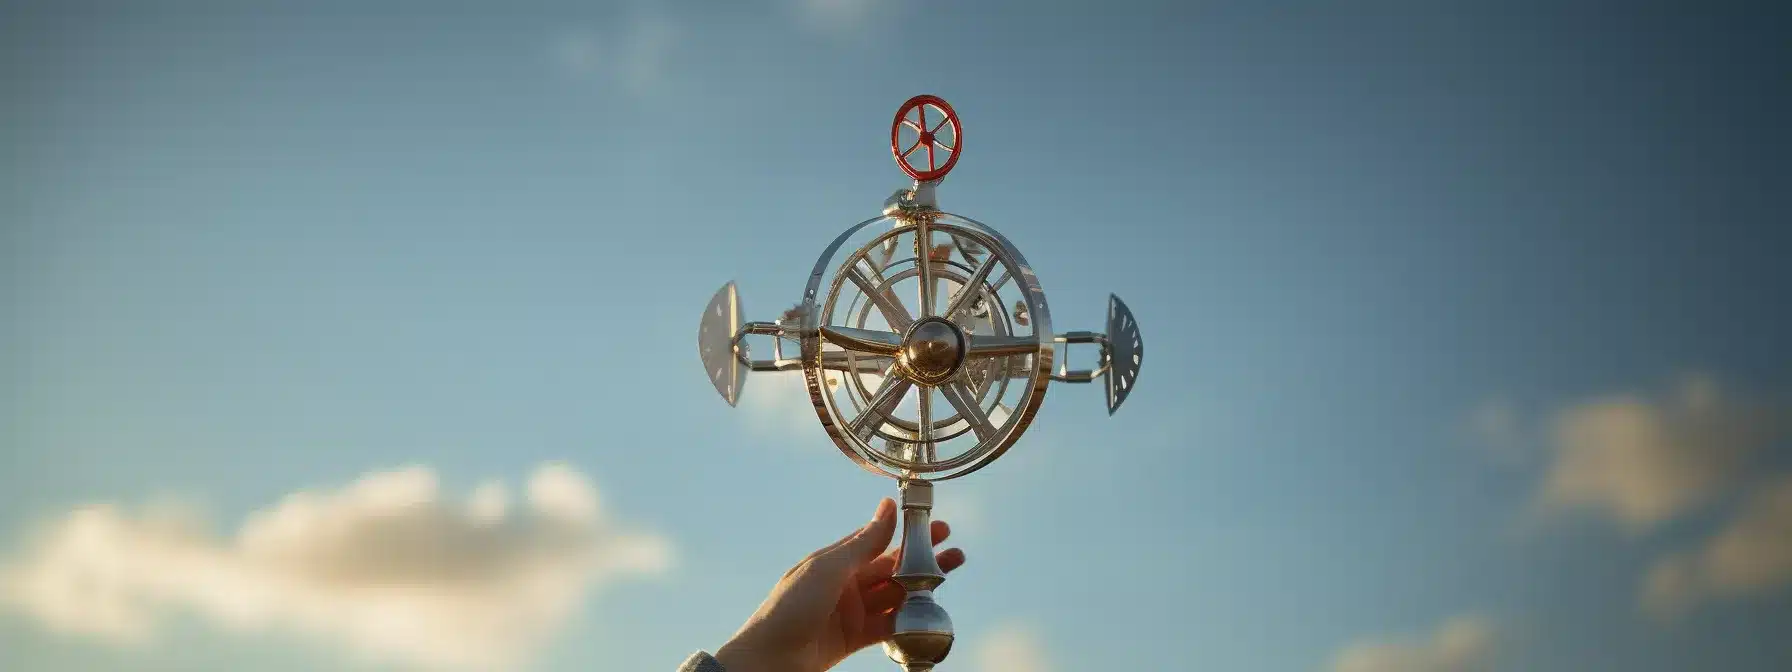 A Person Holding A Compass And Looking At A Rotating Weather Vane.